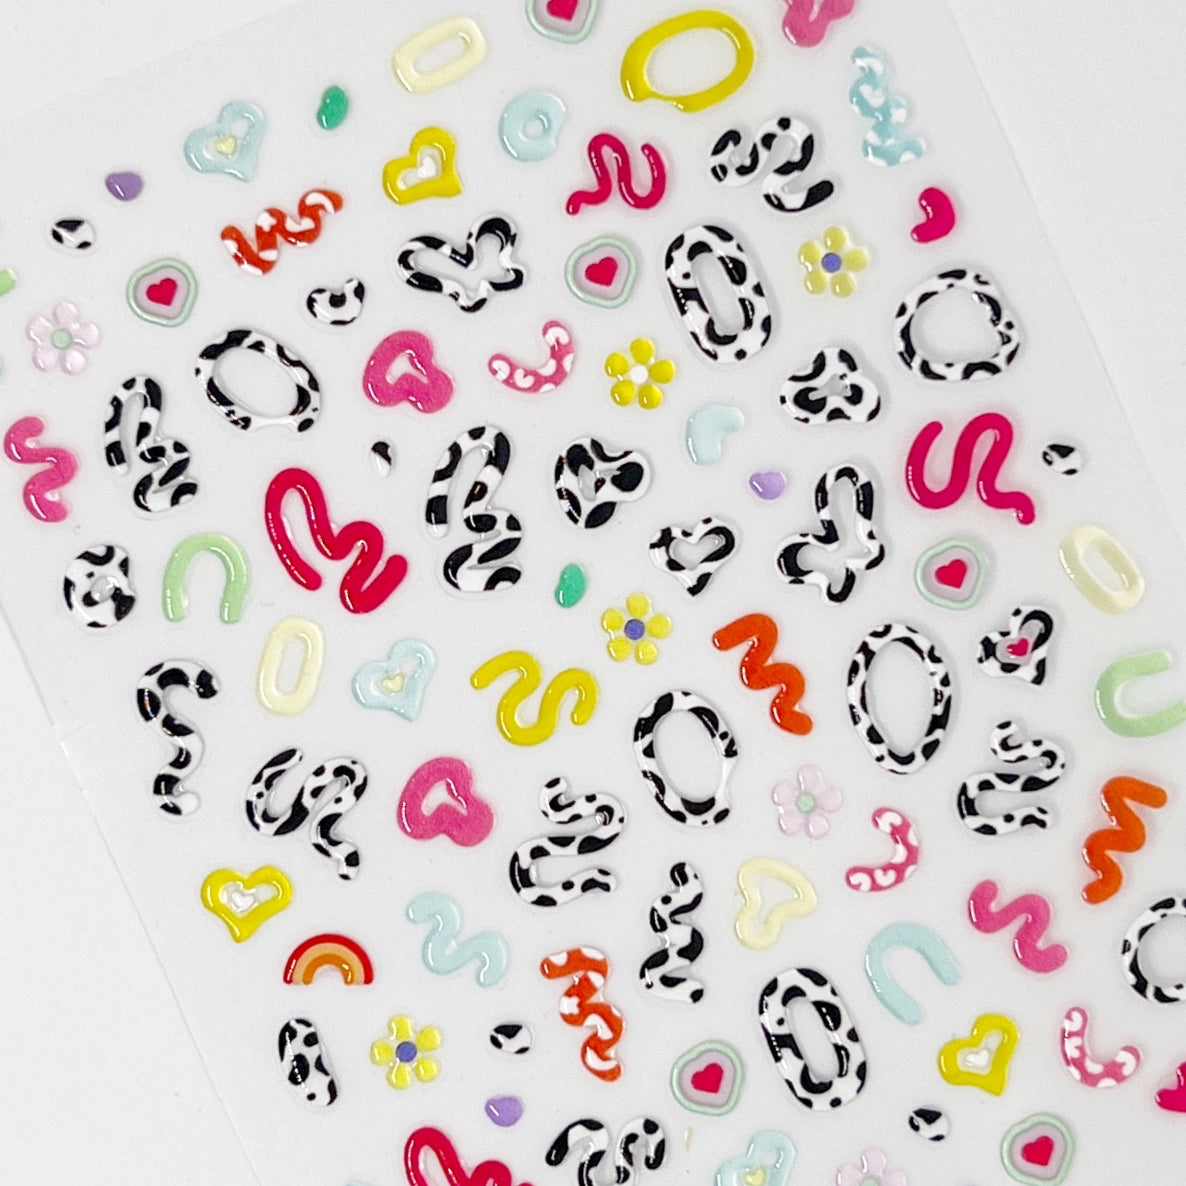 Moo Squiggs Nail Stickers - 3D Jelly-Textured Nail Stickers in Assorted Colors and Cow Print on white background. 